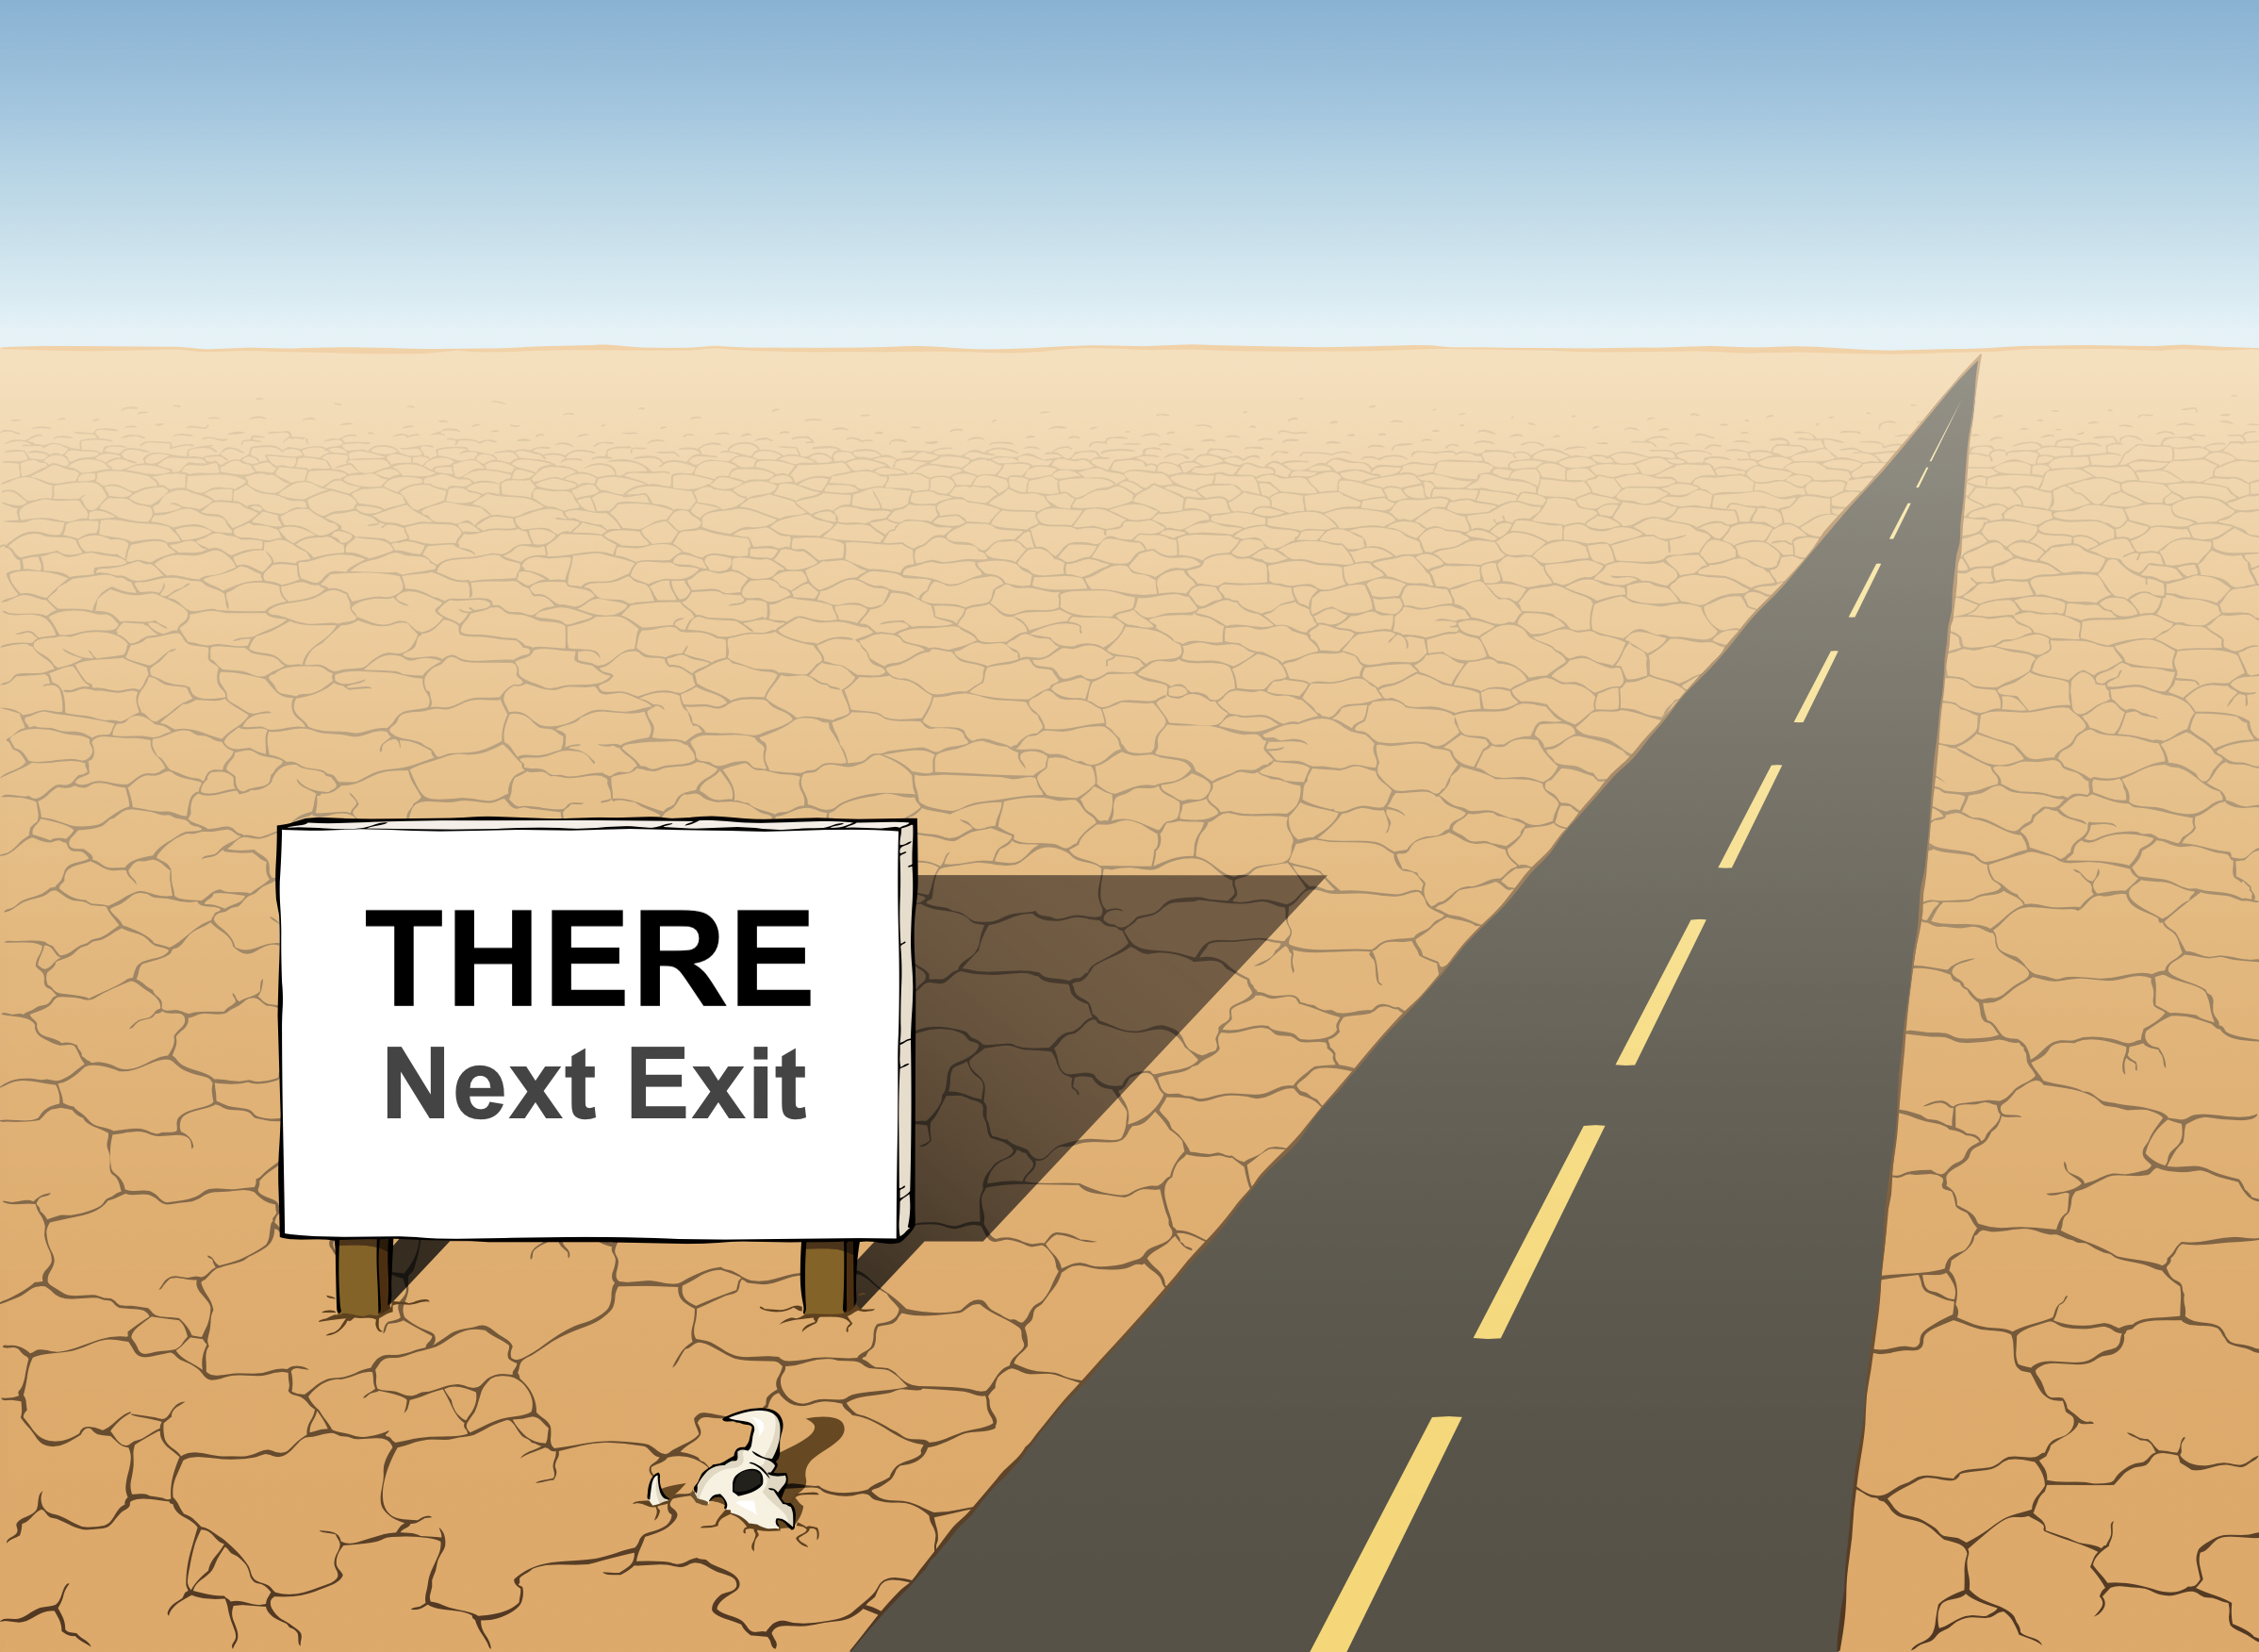 graphic showing exit for THERE being a great distance down road through desert